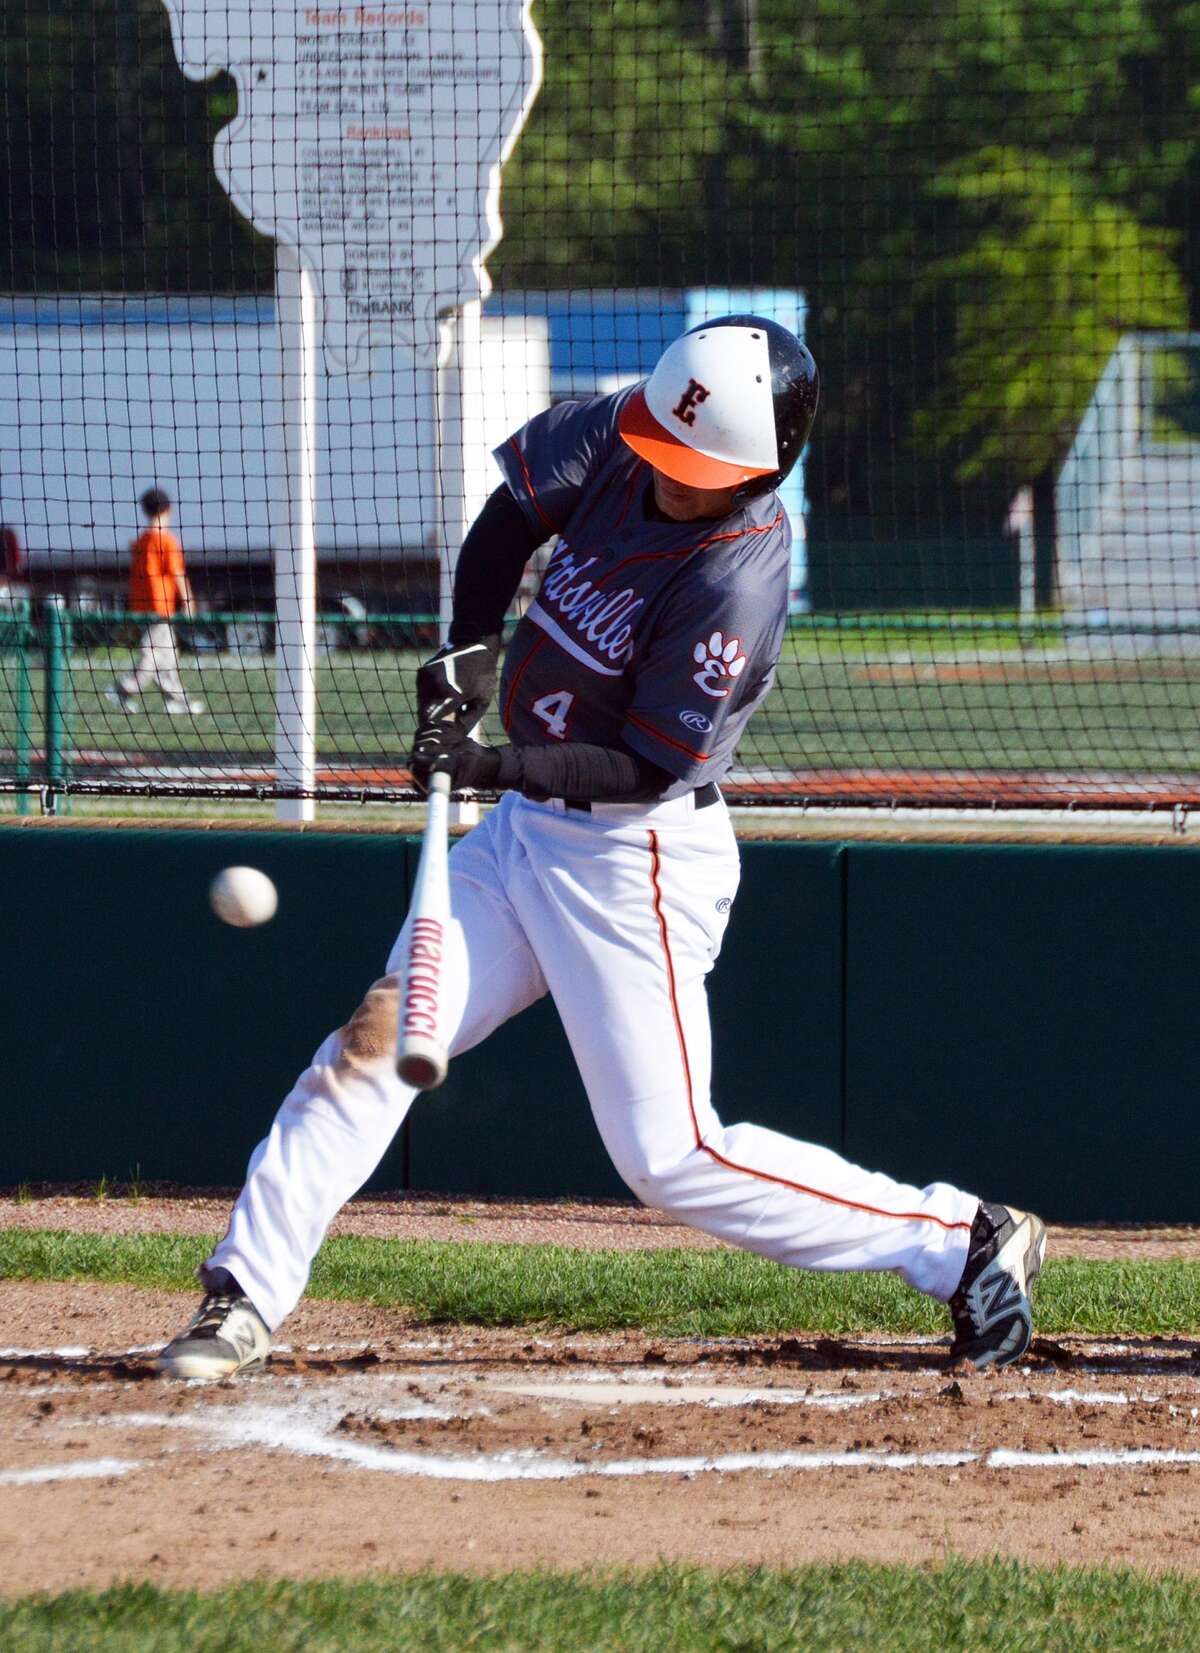 Edwardsville’s Dylan Burris singles up the middle in the fourth inning for his third hit of the game.